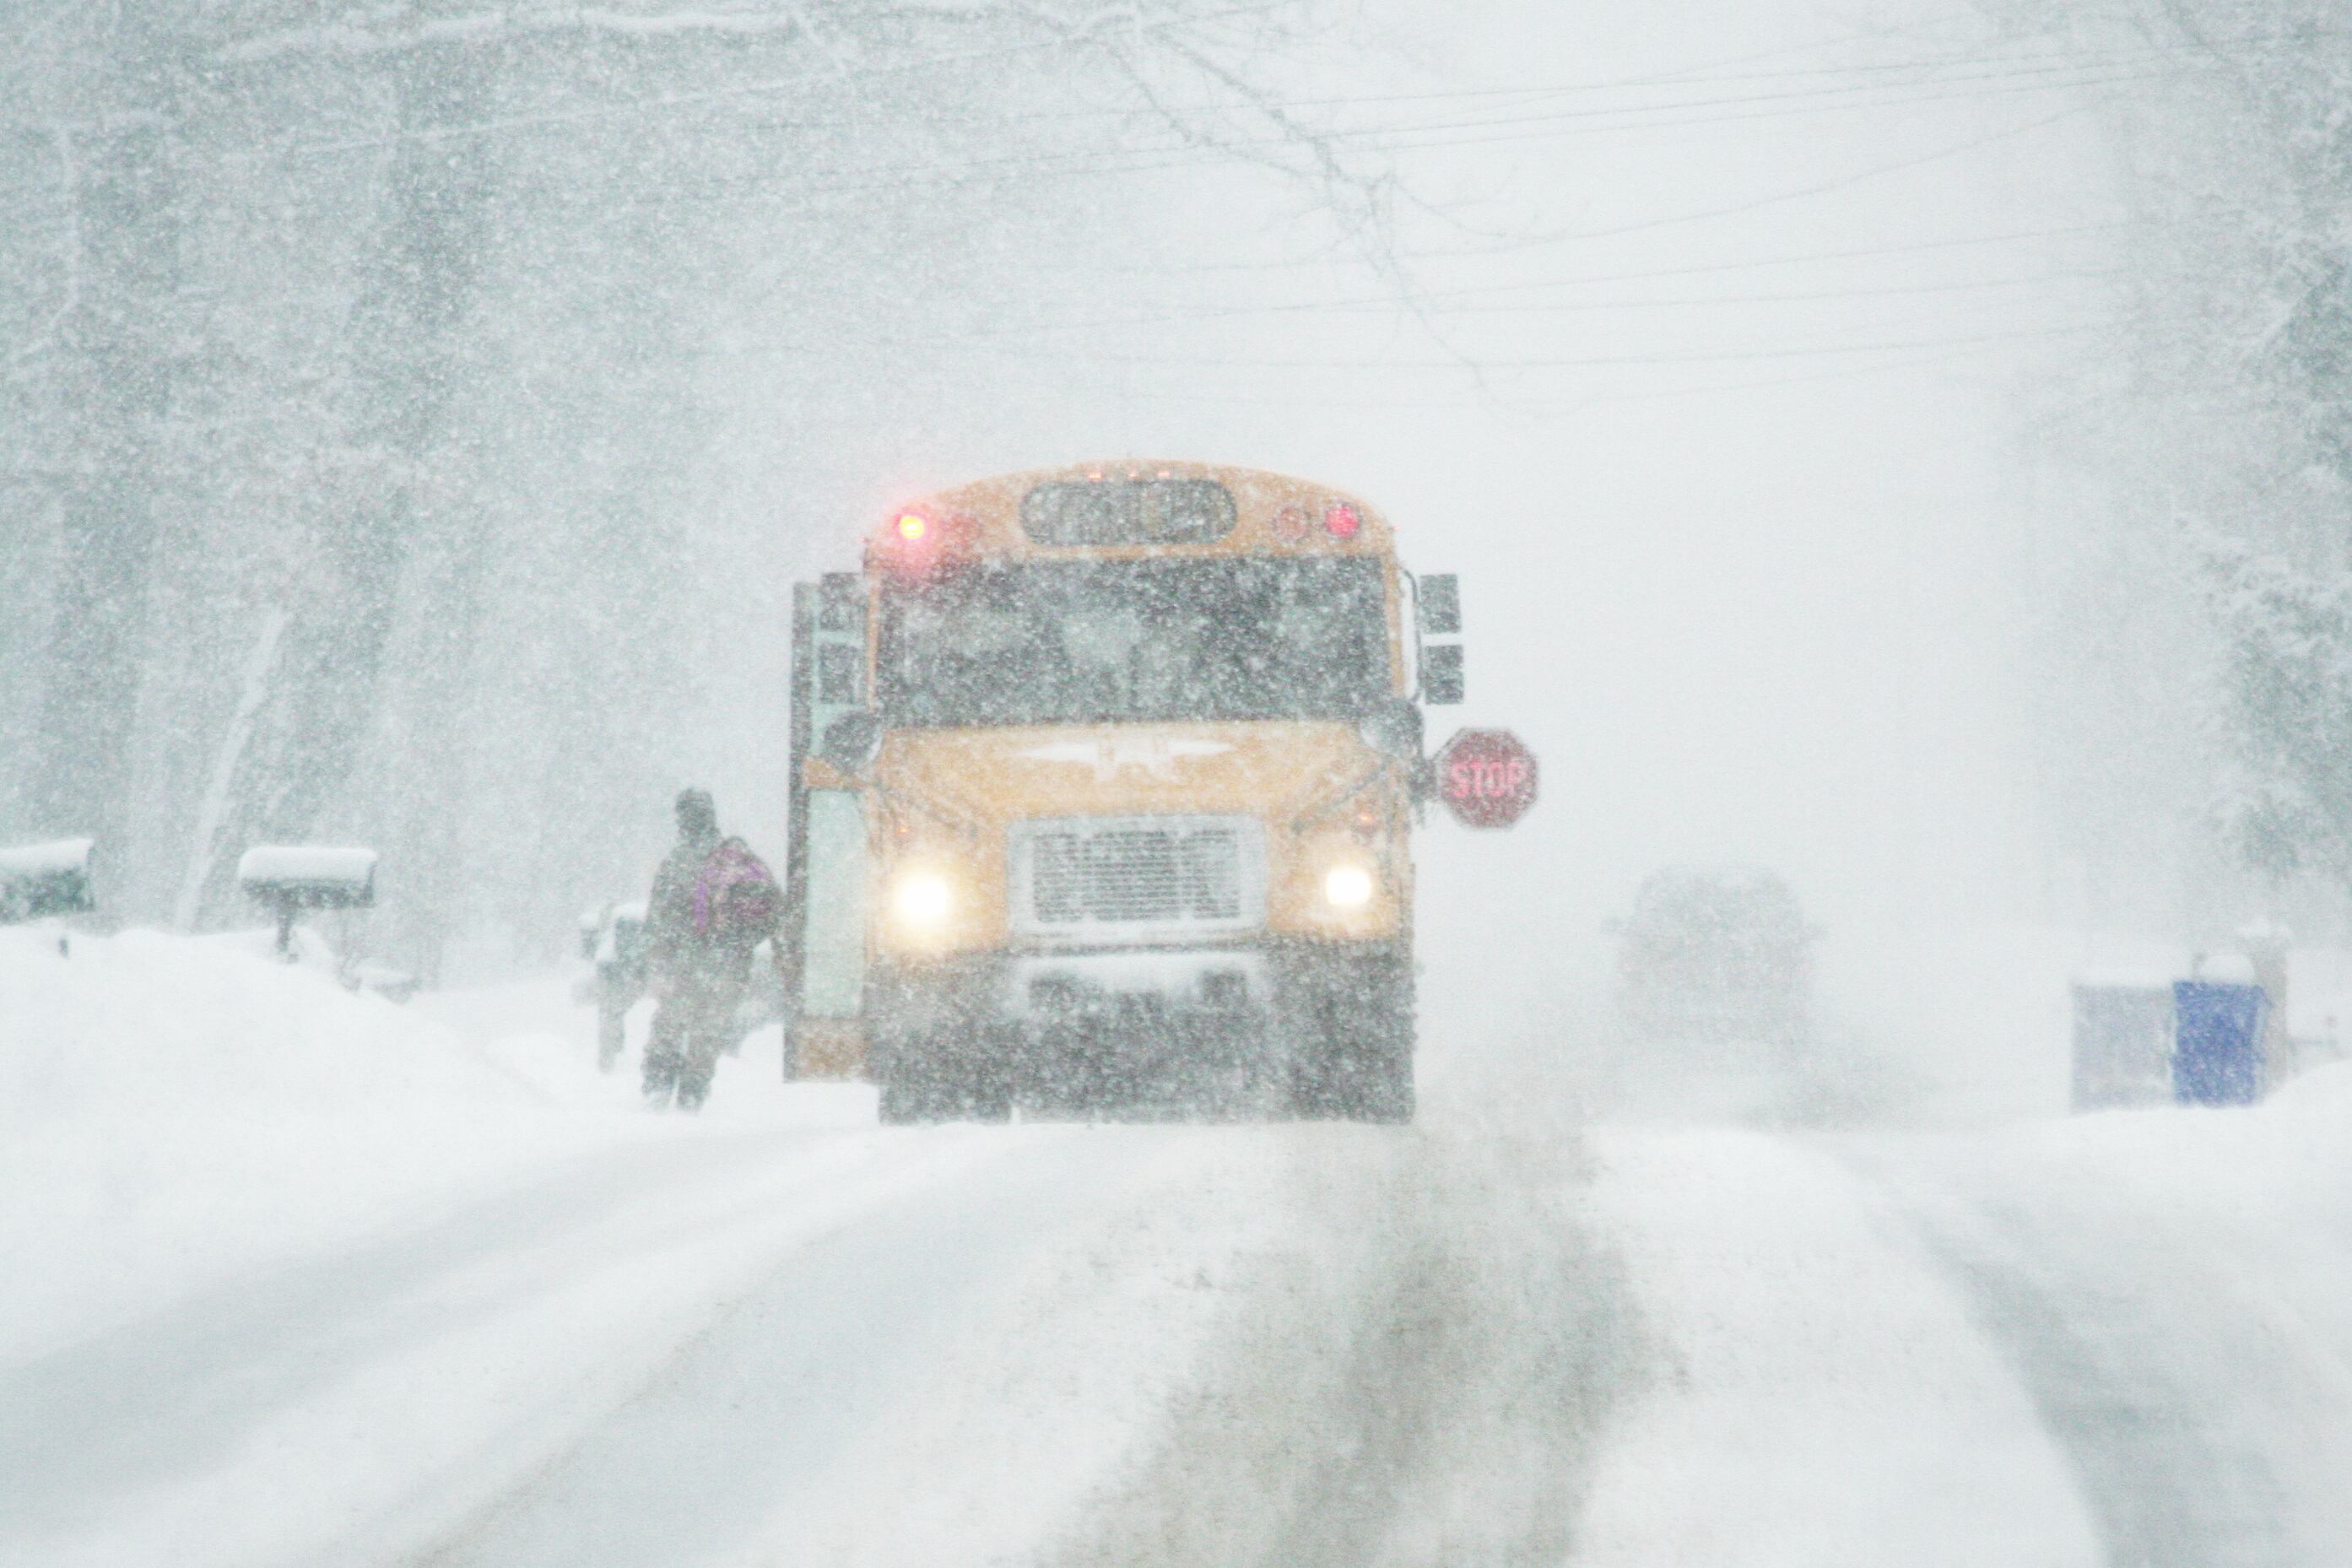 A yellow school bus travels on a snowy road during heavy snow flurries.